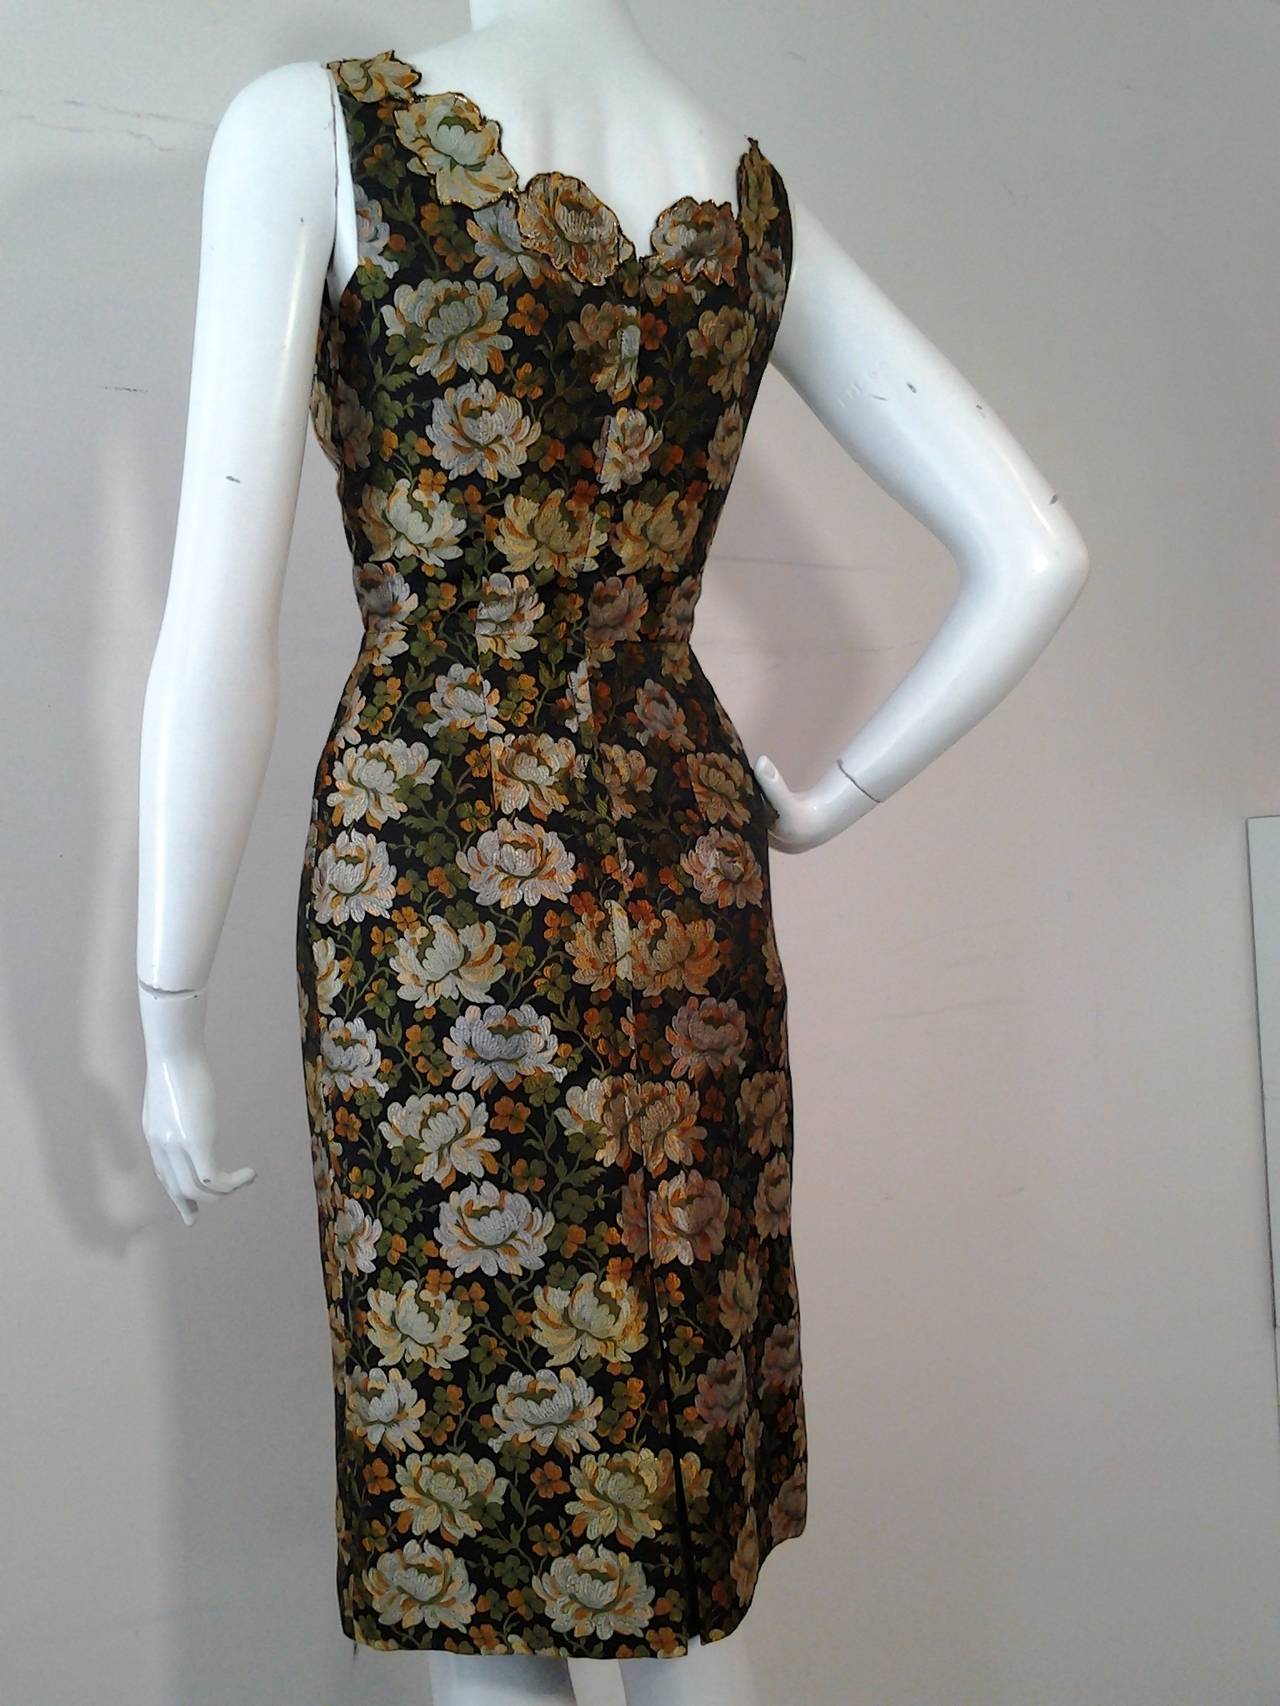 A gorgeous 1950s floral brocade sheath in brown gold and black.  Neckline is hand appliqued with flowers cut from the fabric.  An overskirt that hooks at waist is included, though there are a few stains on it. (They could be removed by making some